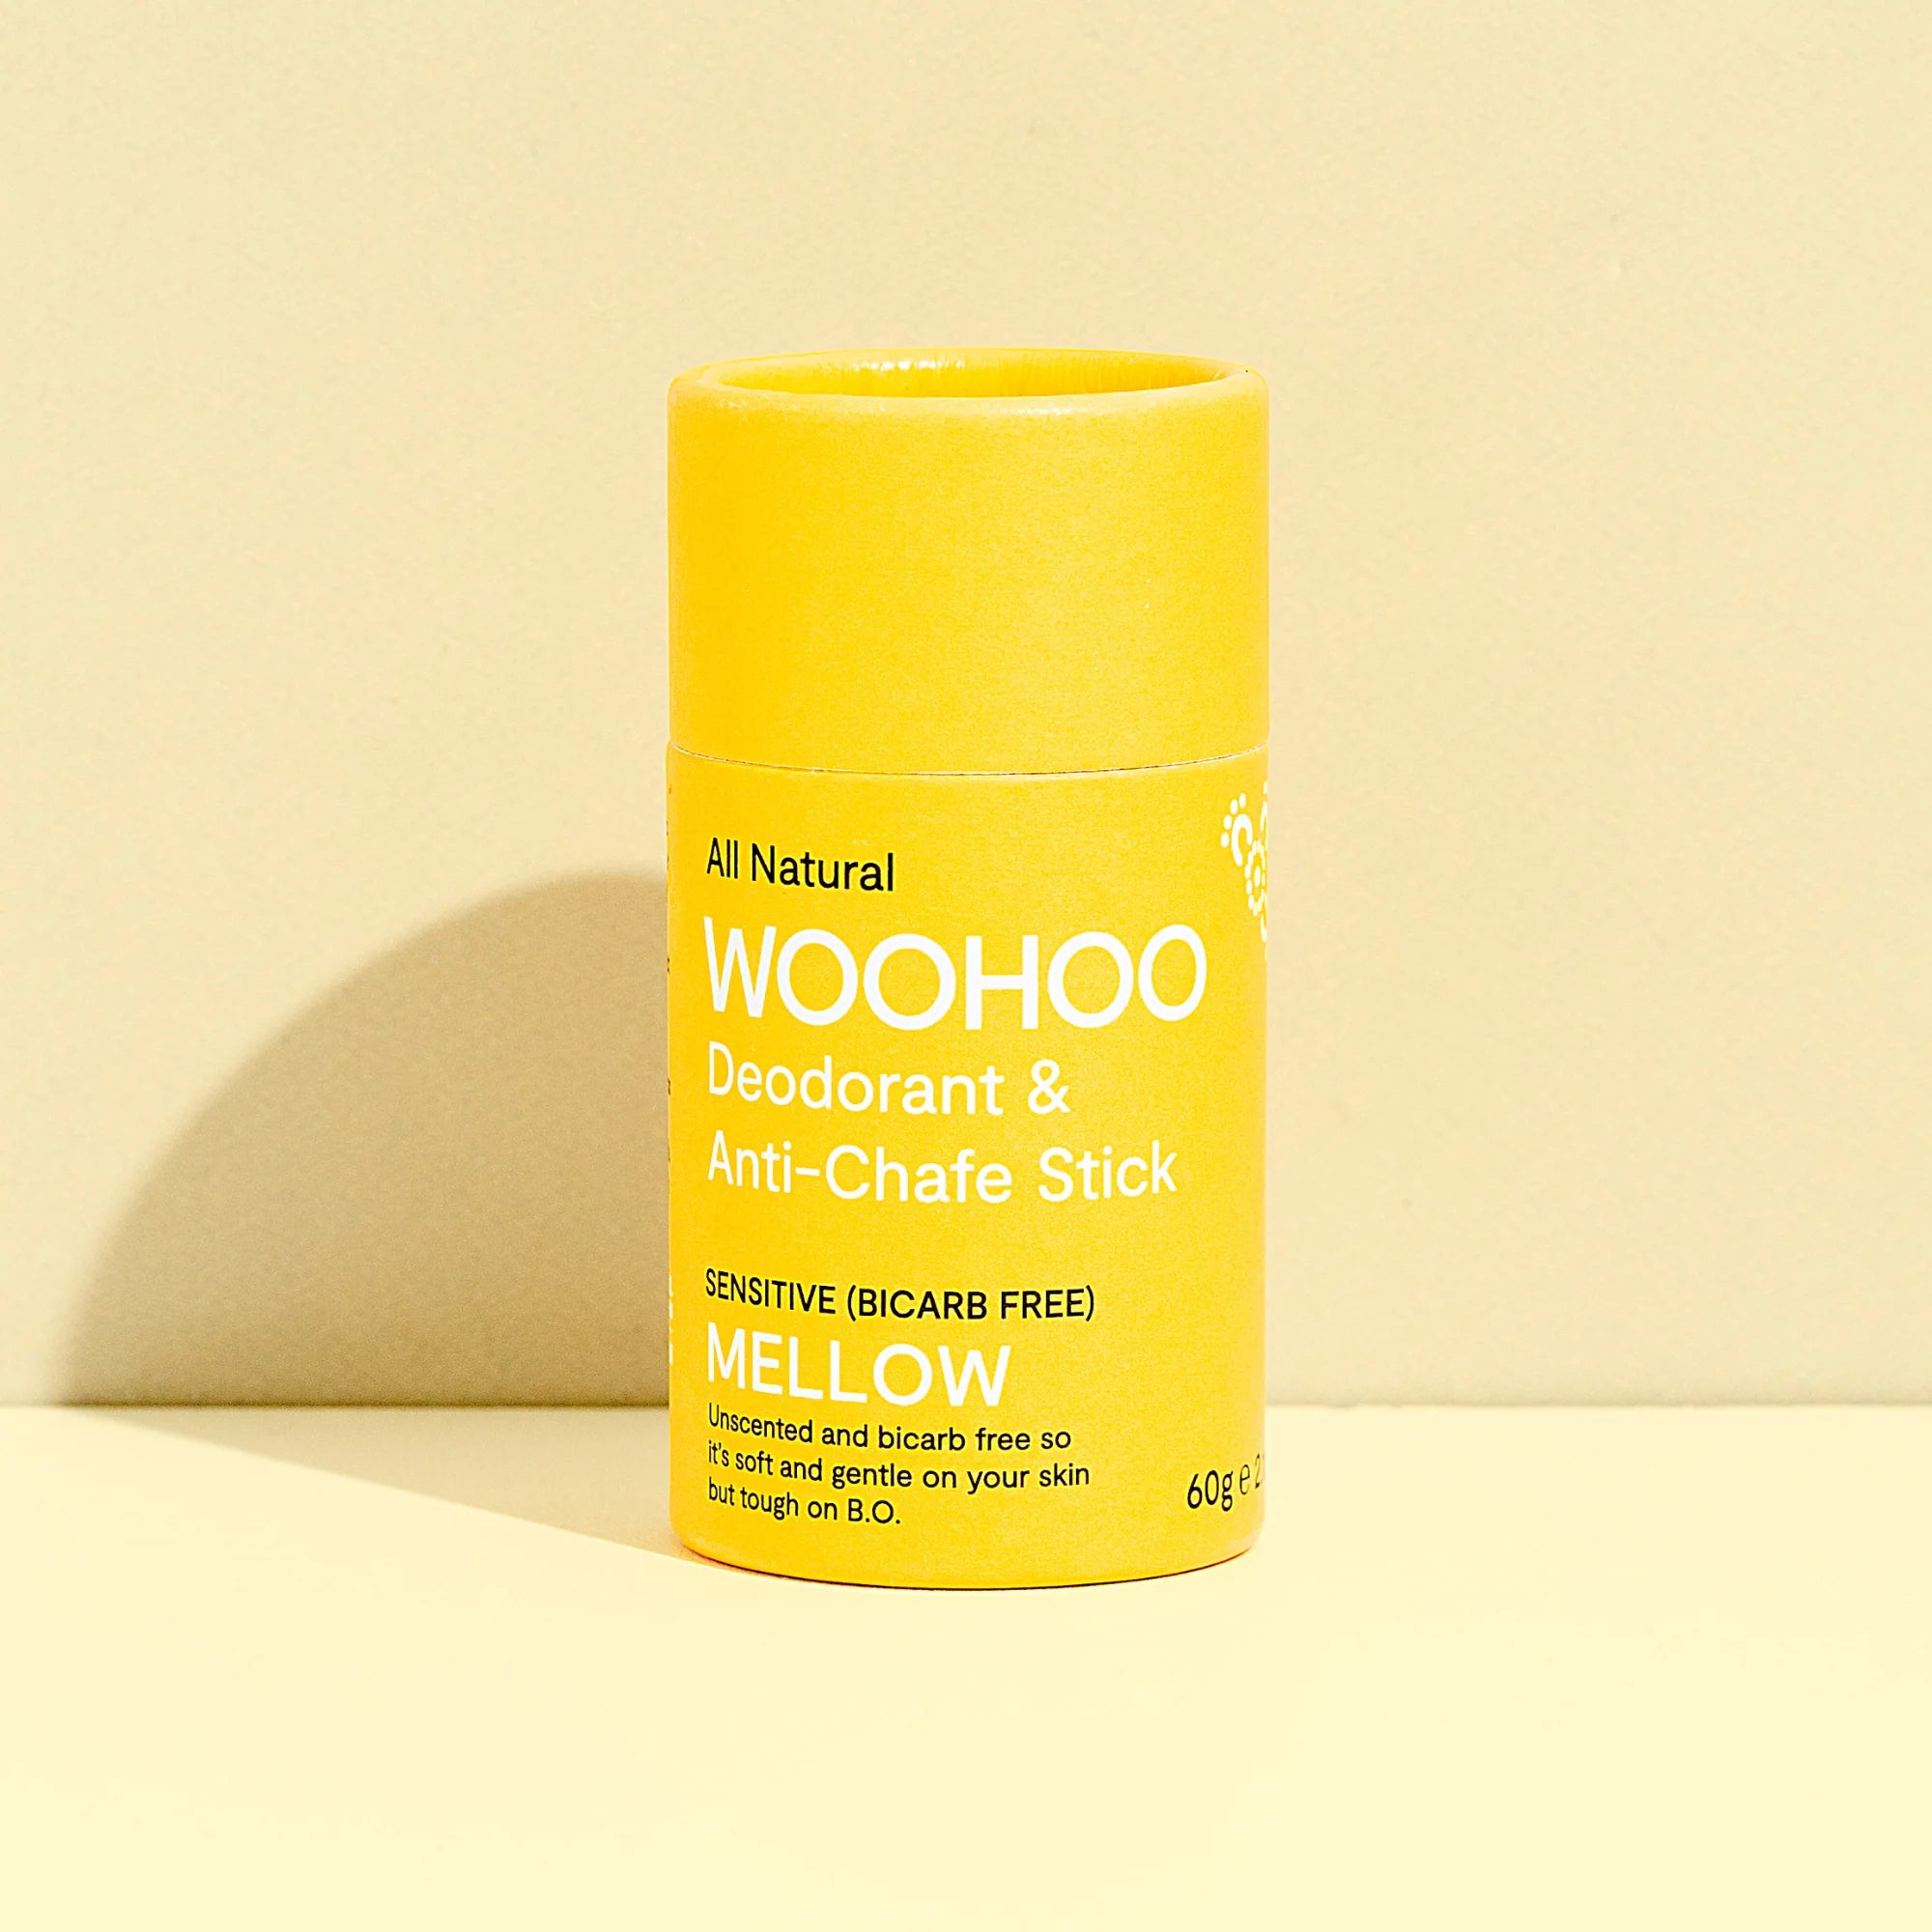 Image of Mellow Natural Bicarb-free Deodorant Stick on a light yellow background